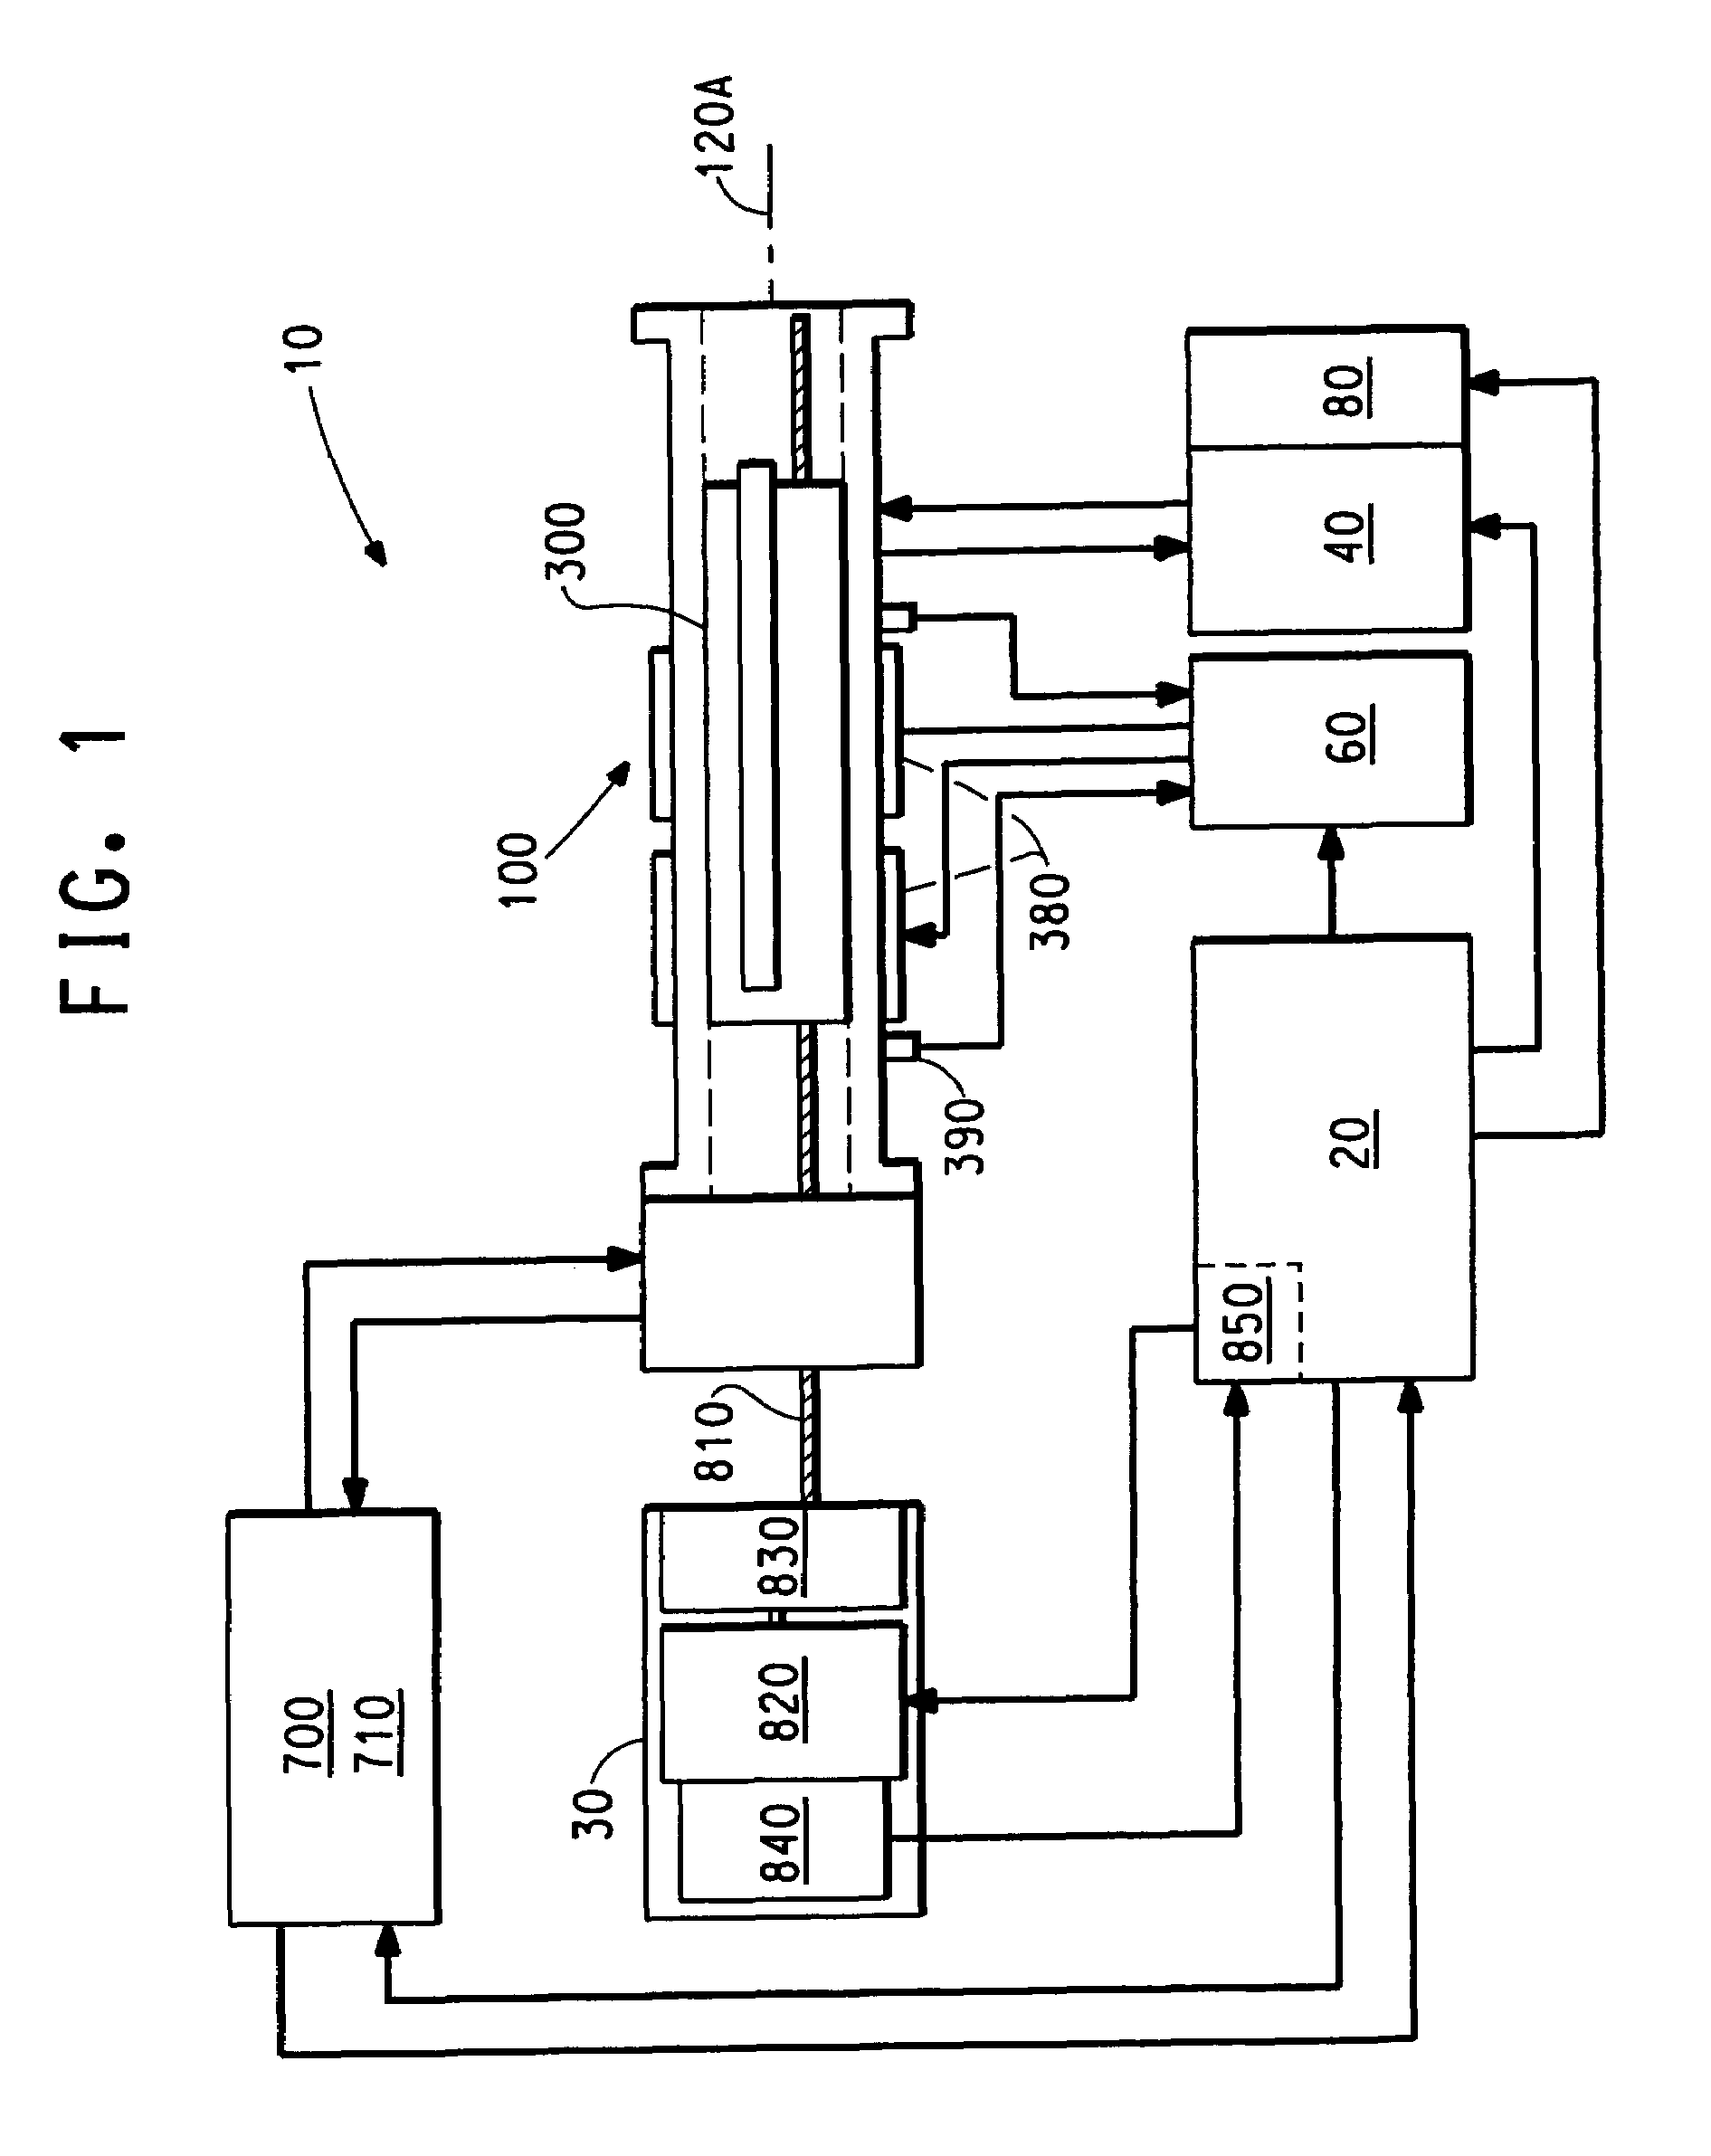 Method and apparatus for performing chemical reactions in a plurality of samples